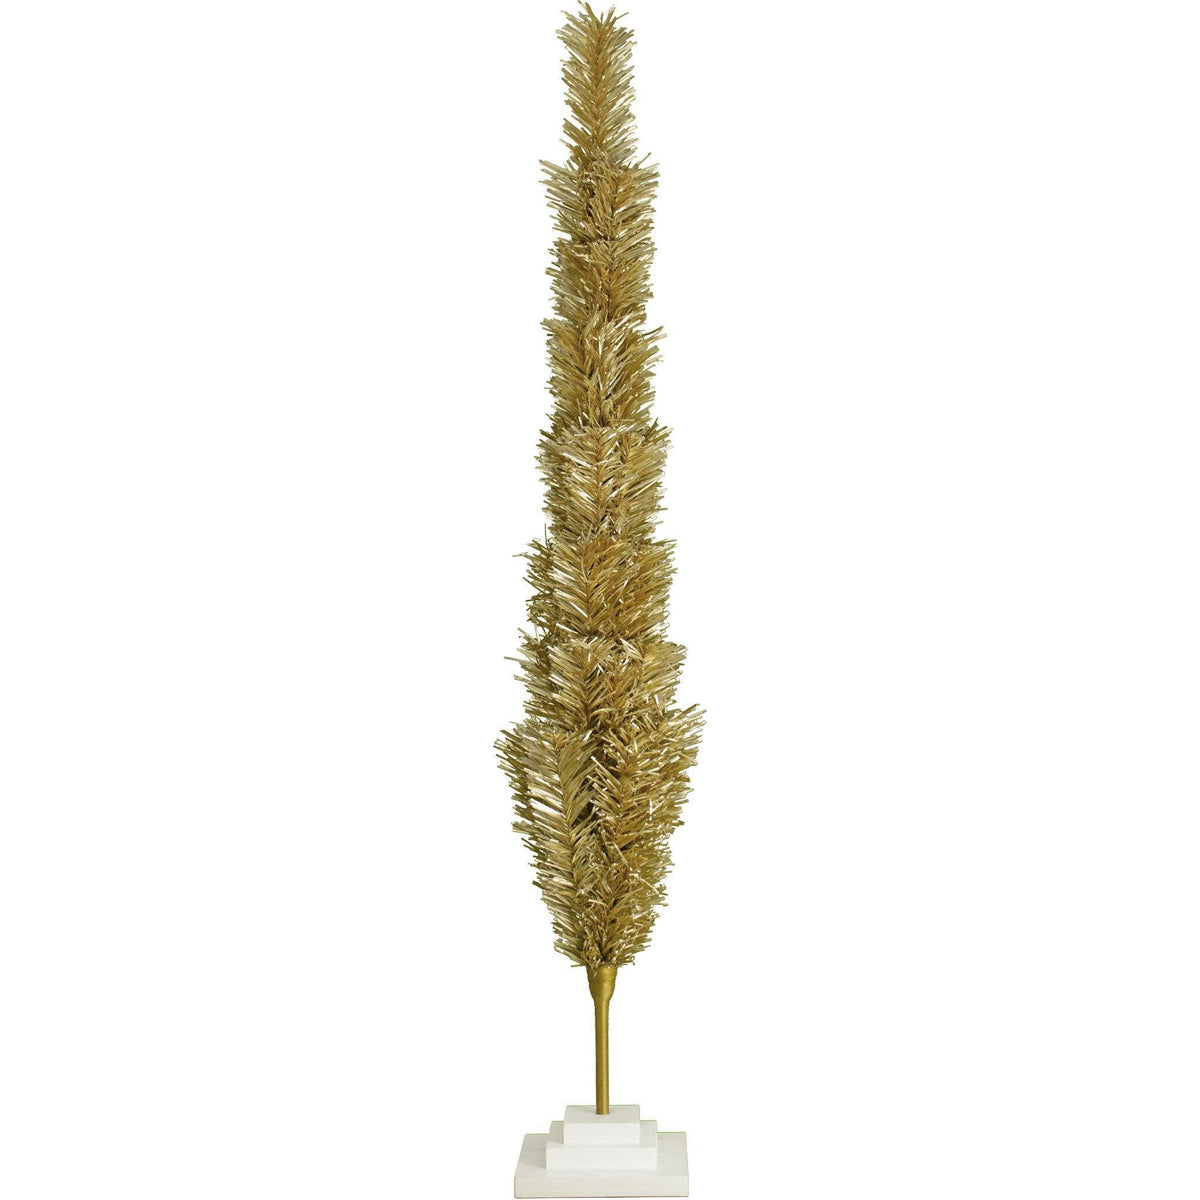 Our 36in Tall Antique Gold Christmas Tree has folding branches to shape how you like and safely store in your closet. 